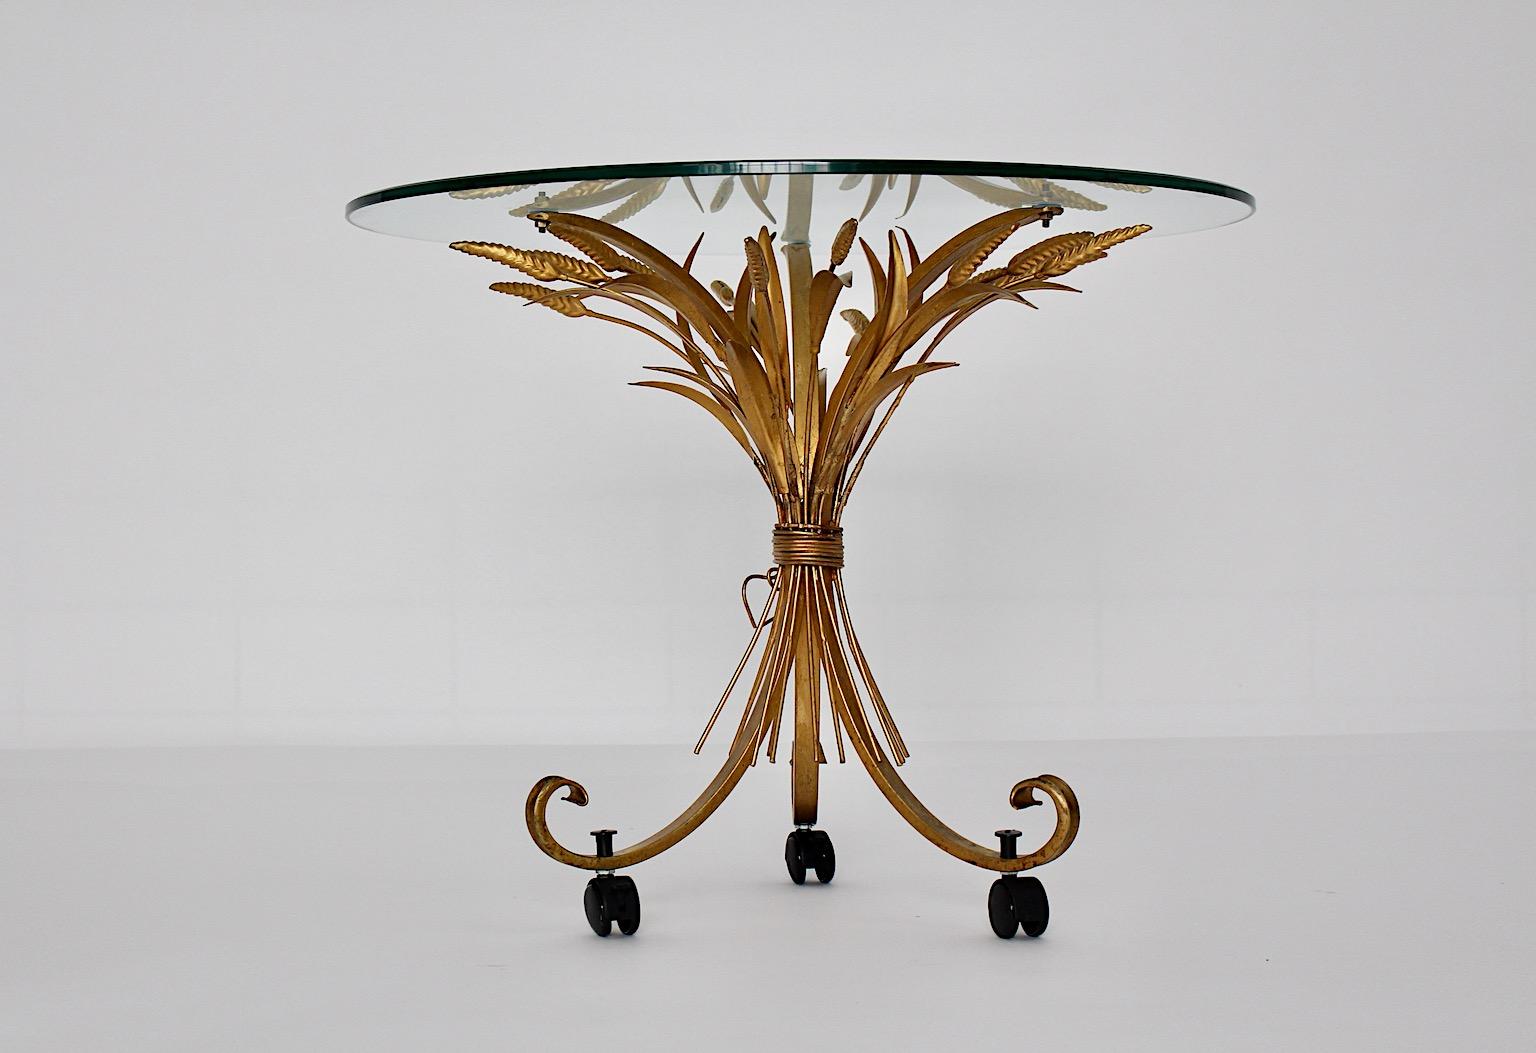 Golden metal vintage coffee table or side table in Hollywood Regency style designed 1970s France.
Amazing coffee table with bunch of wheat like base with three black wheels at the bottom and a clear glass top.
Coco Chanel used a similar model in